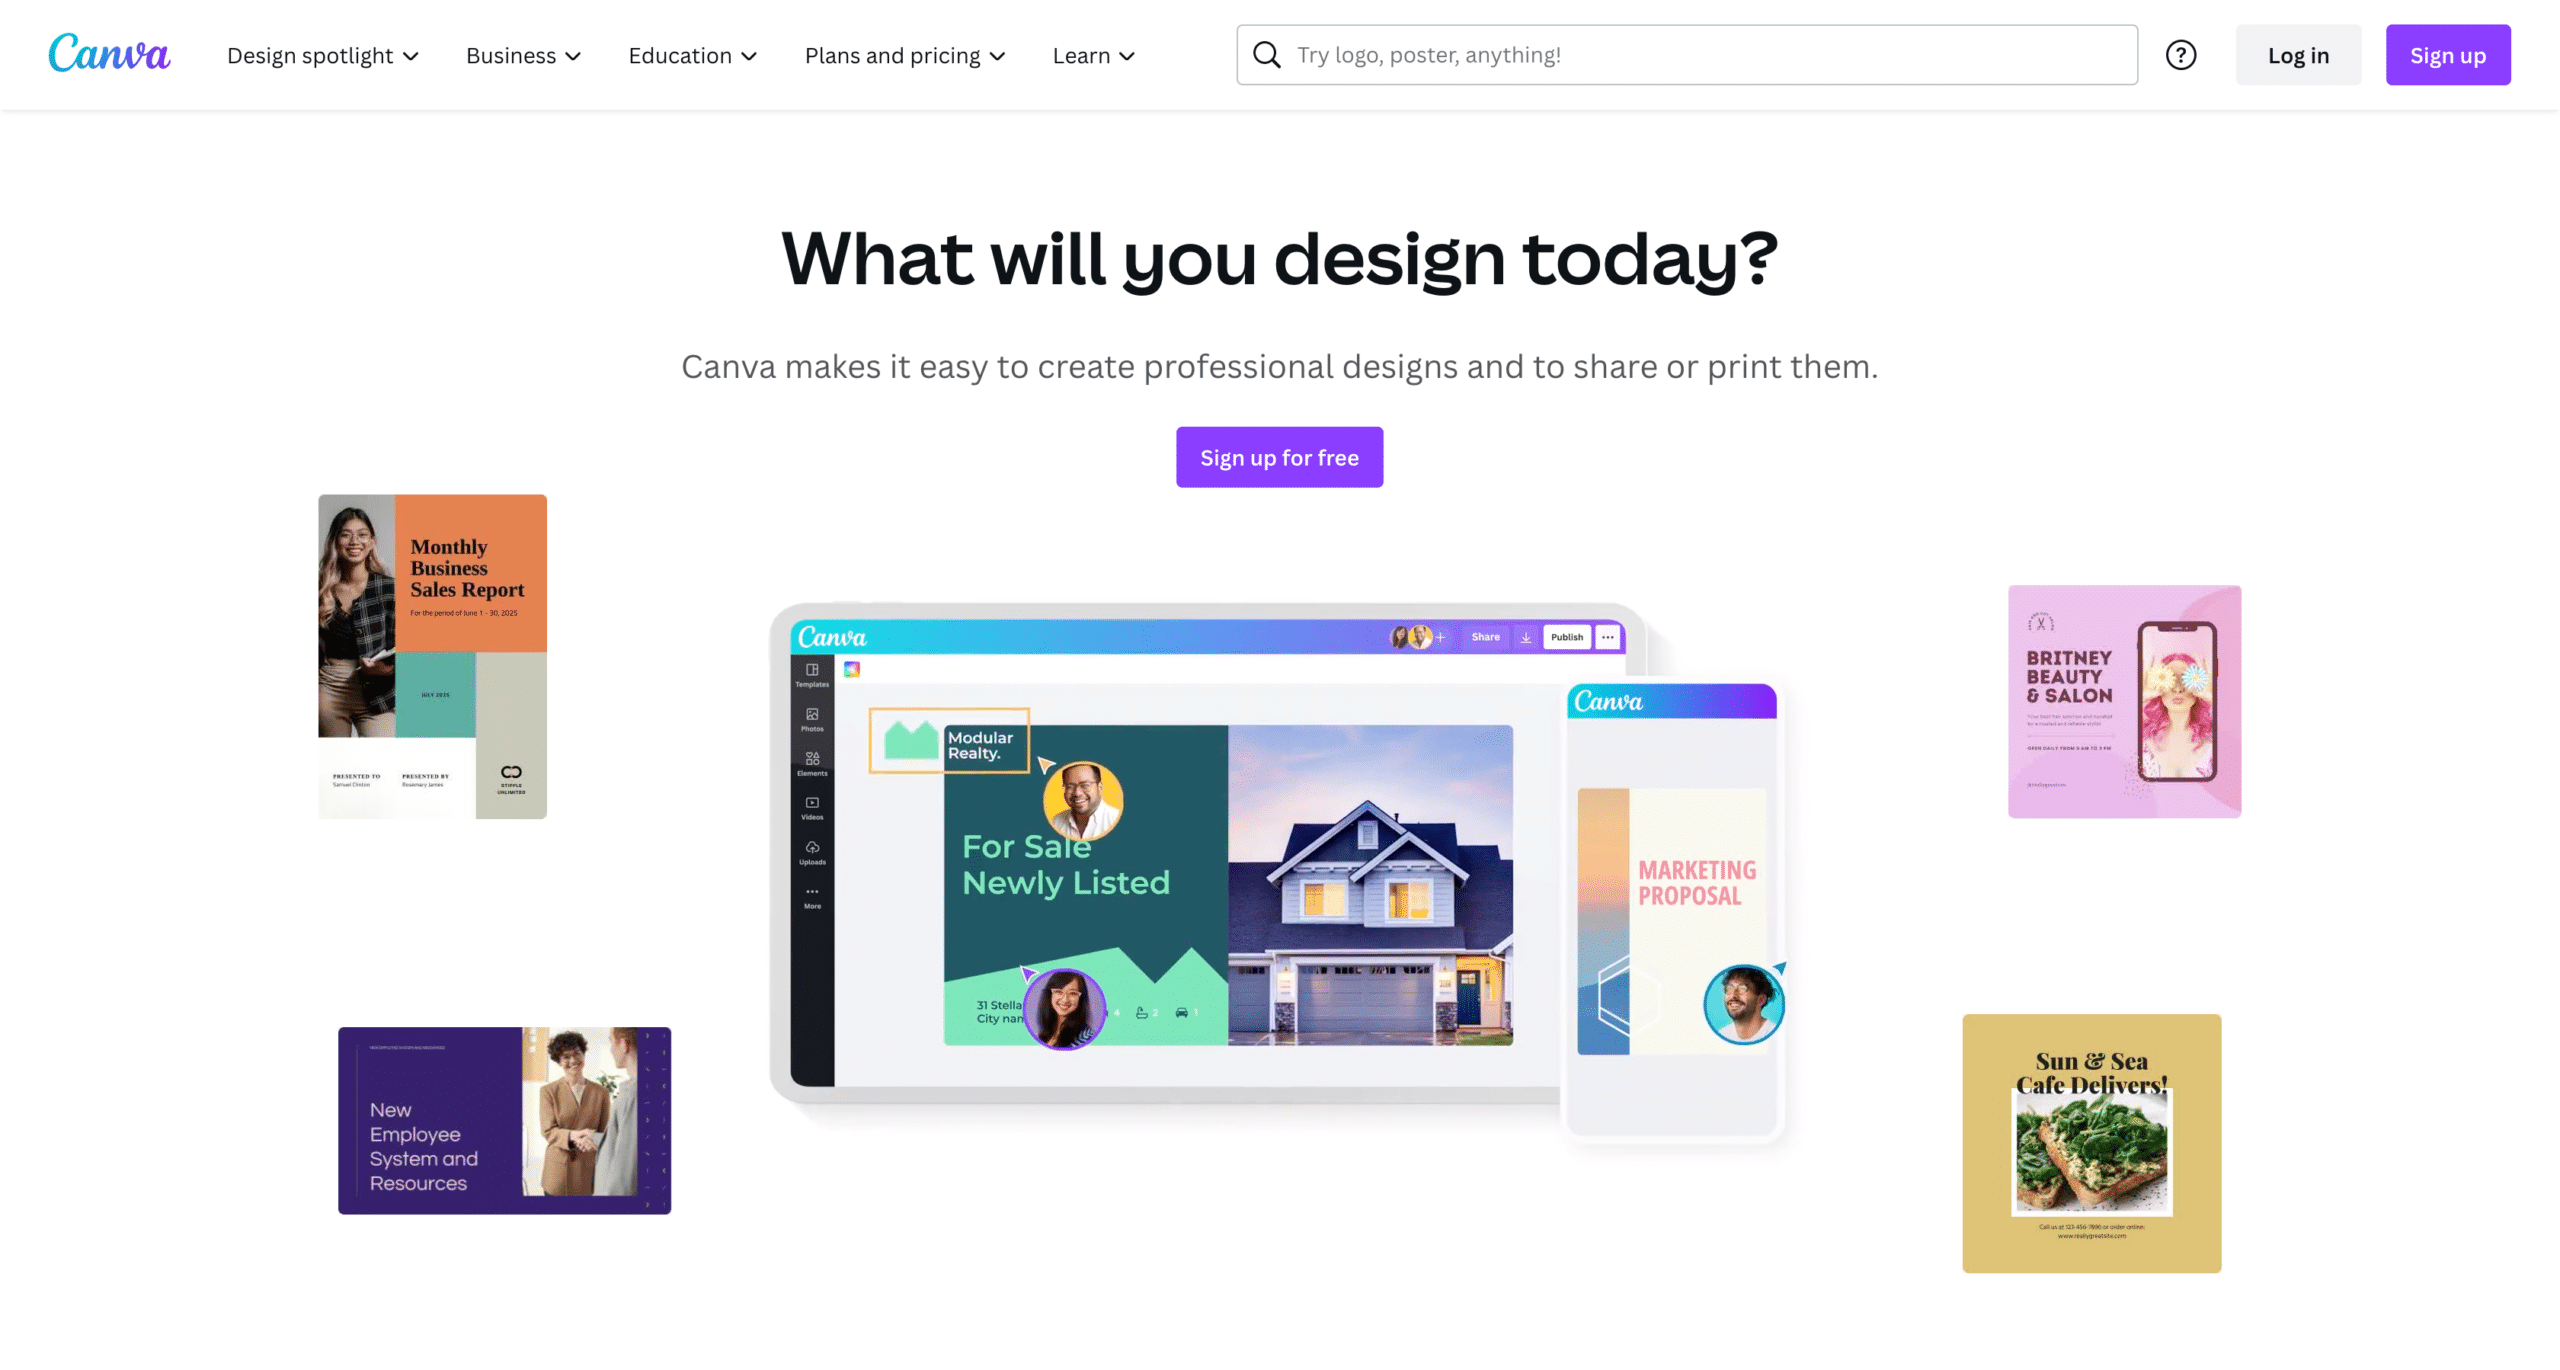 Canva; arguably the best SaaS company in the graphic design niche